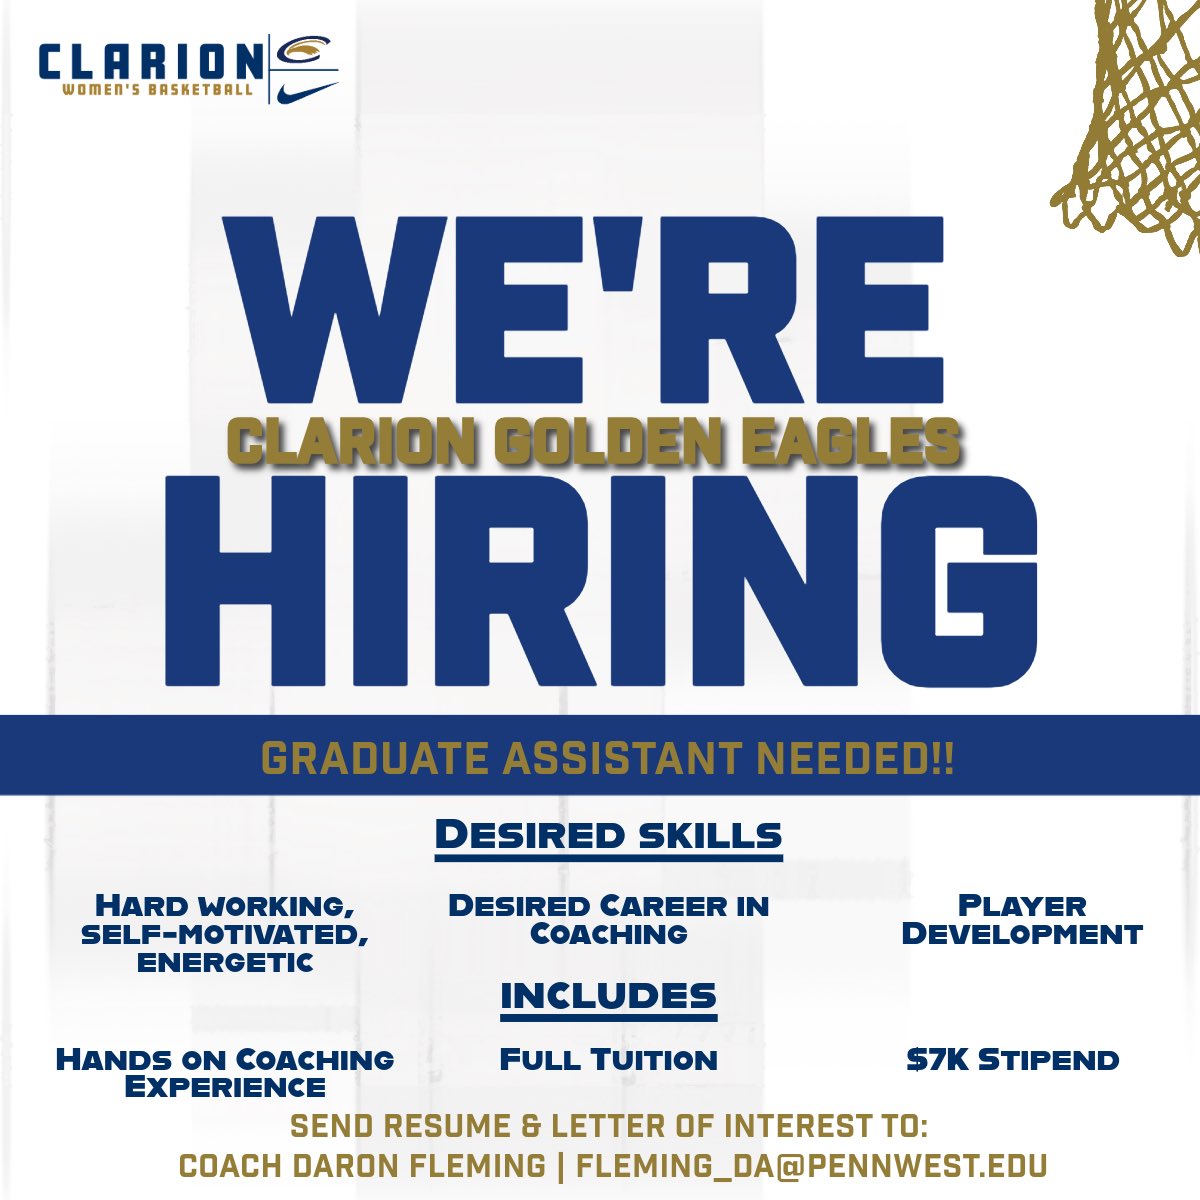 Clarion WBB is looking for a hard working, self-motivated, enthusiastic and energetic person to fill our ‼️Graduate Assistant Position‼️ If you or someone you know is interested please Send: Resume & Letter of Interest to: Coach Daron Fleming fleming_da@pennwest.edu